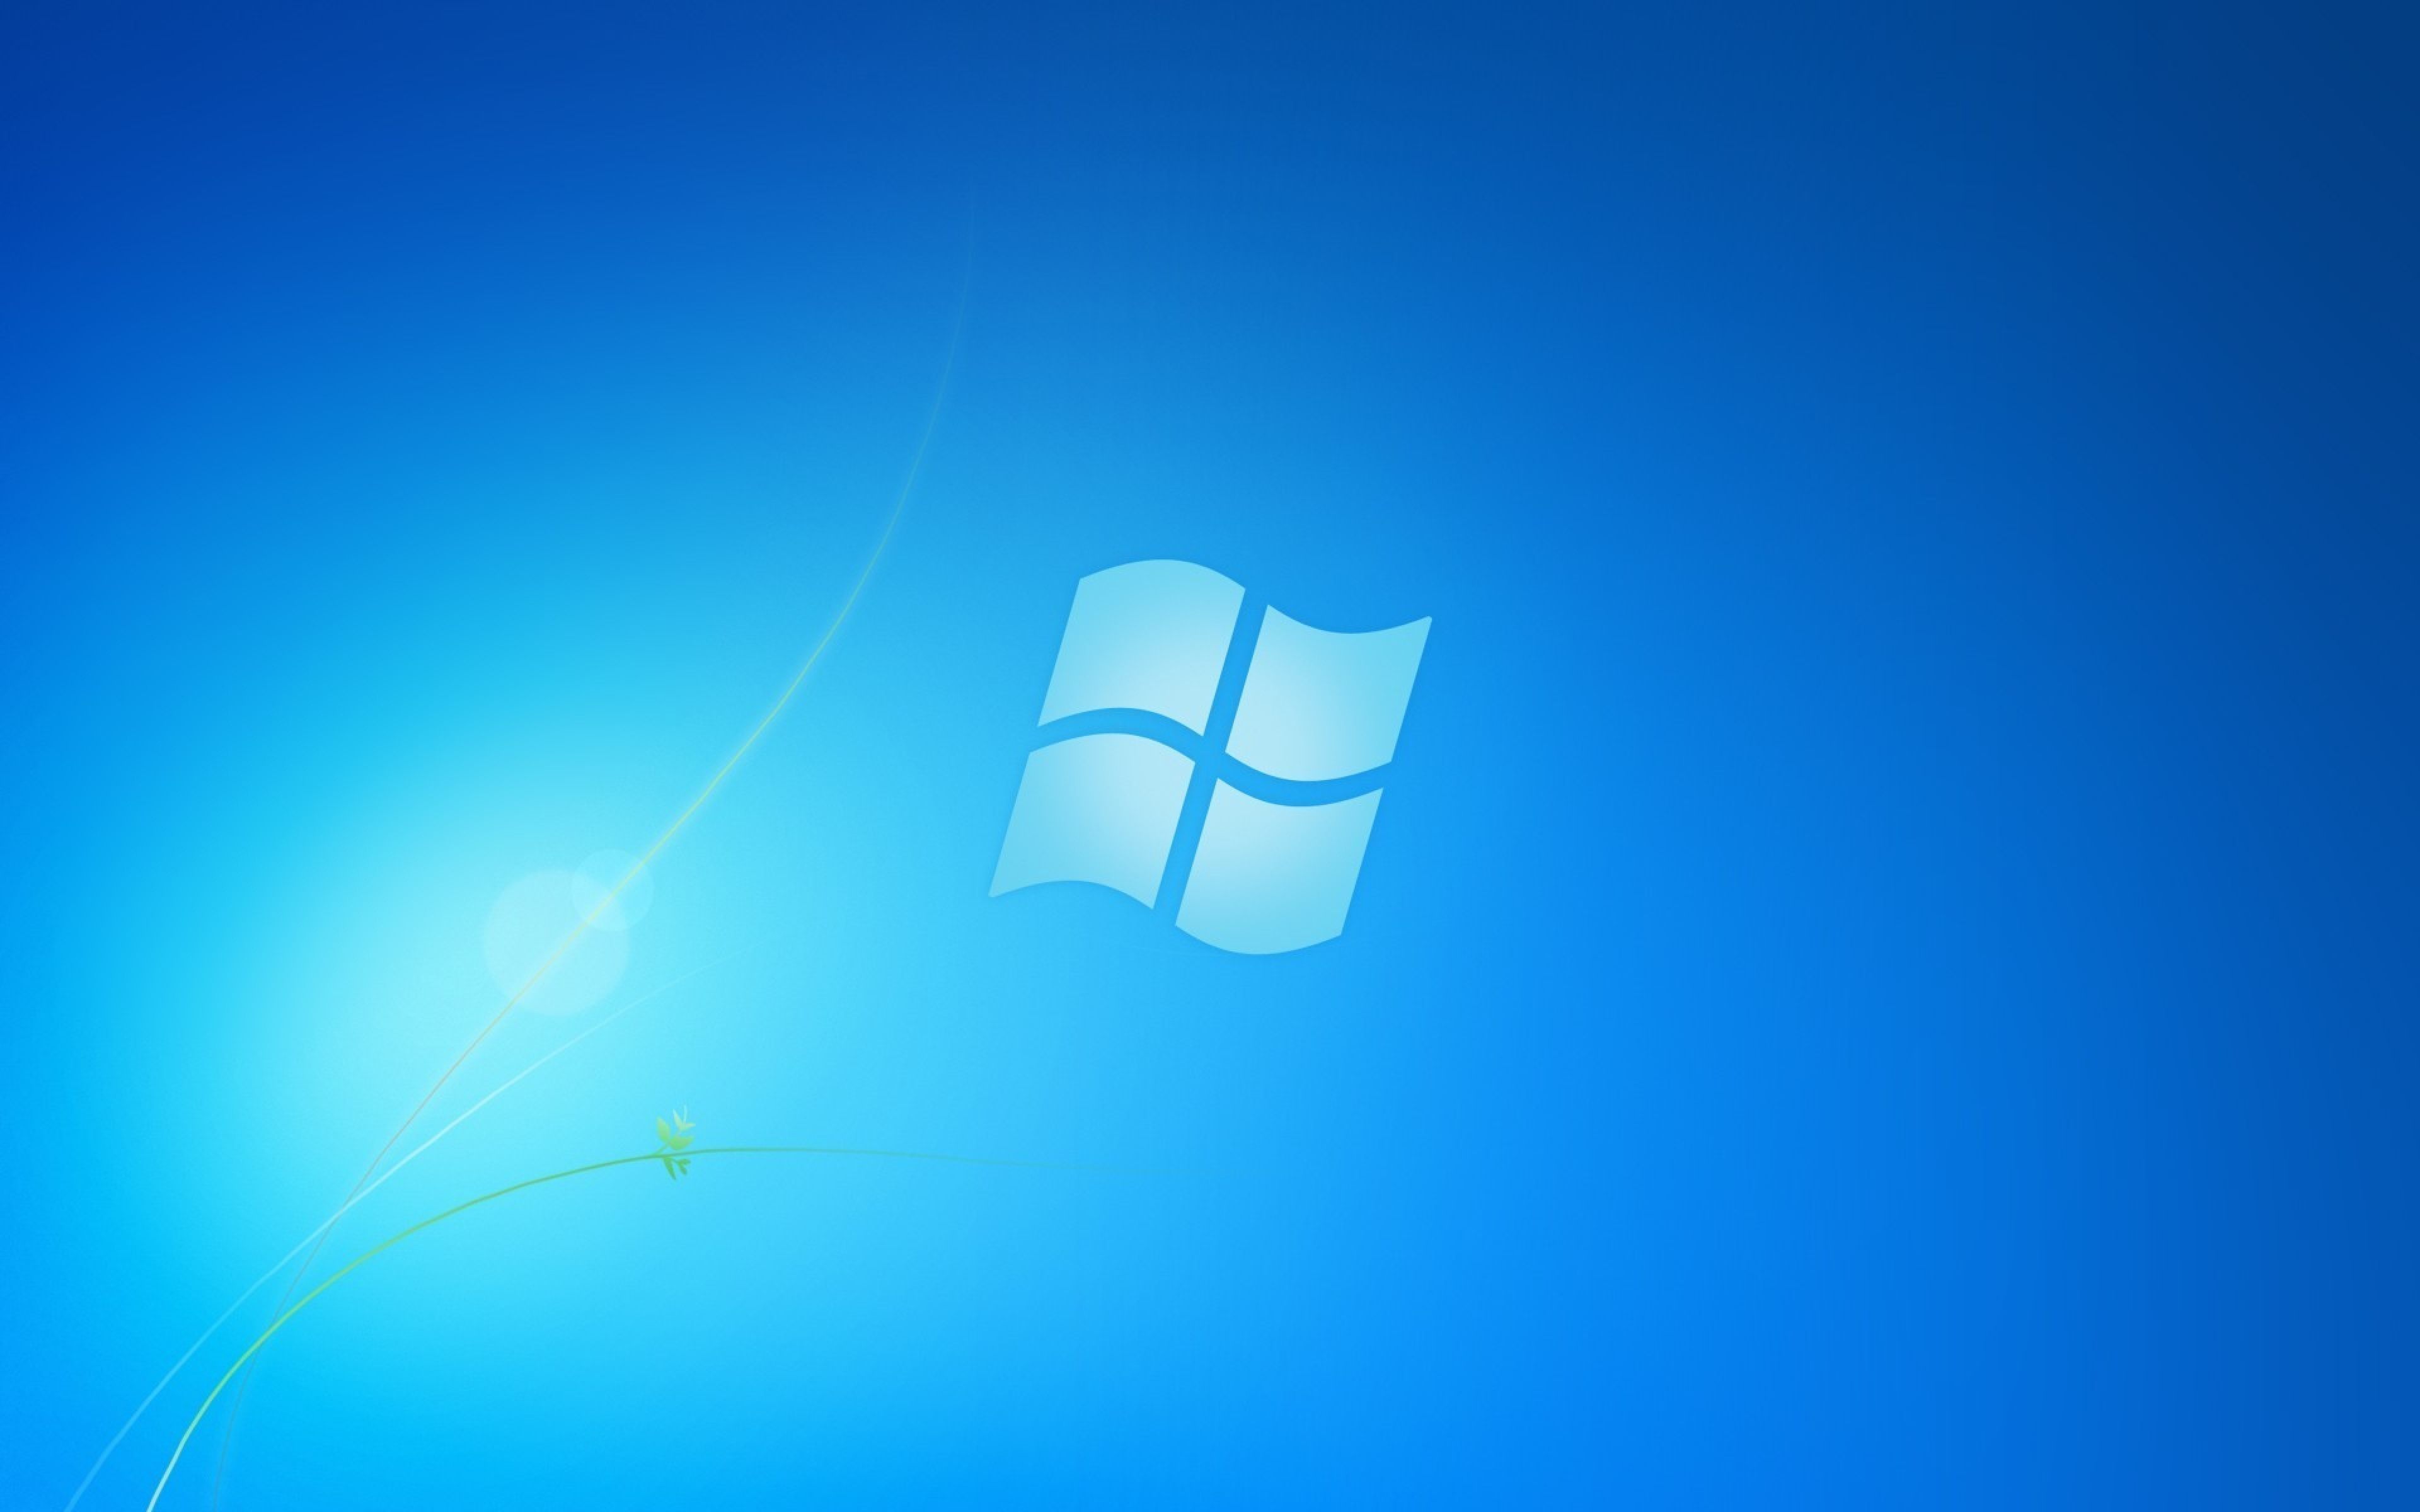 Windows 7 Wallpaper HD Download For Desktop in High Quality